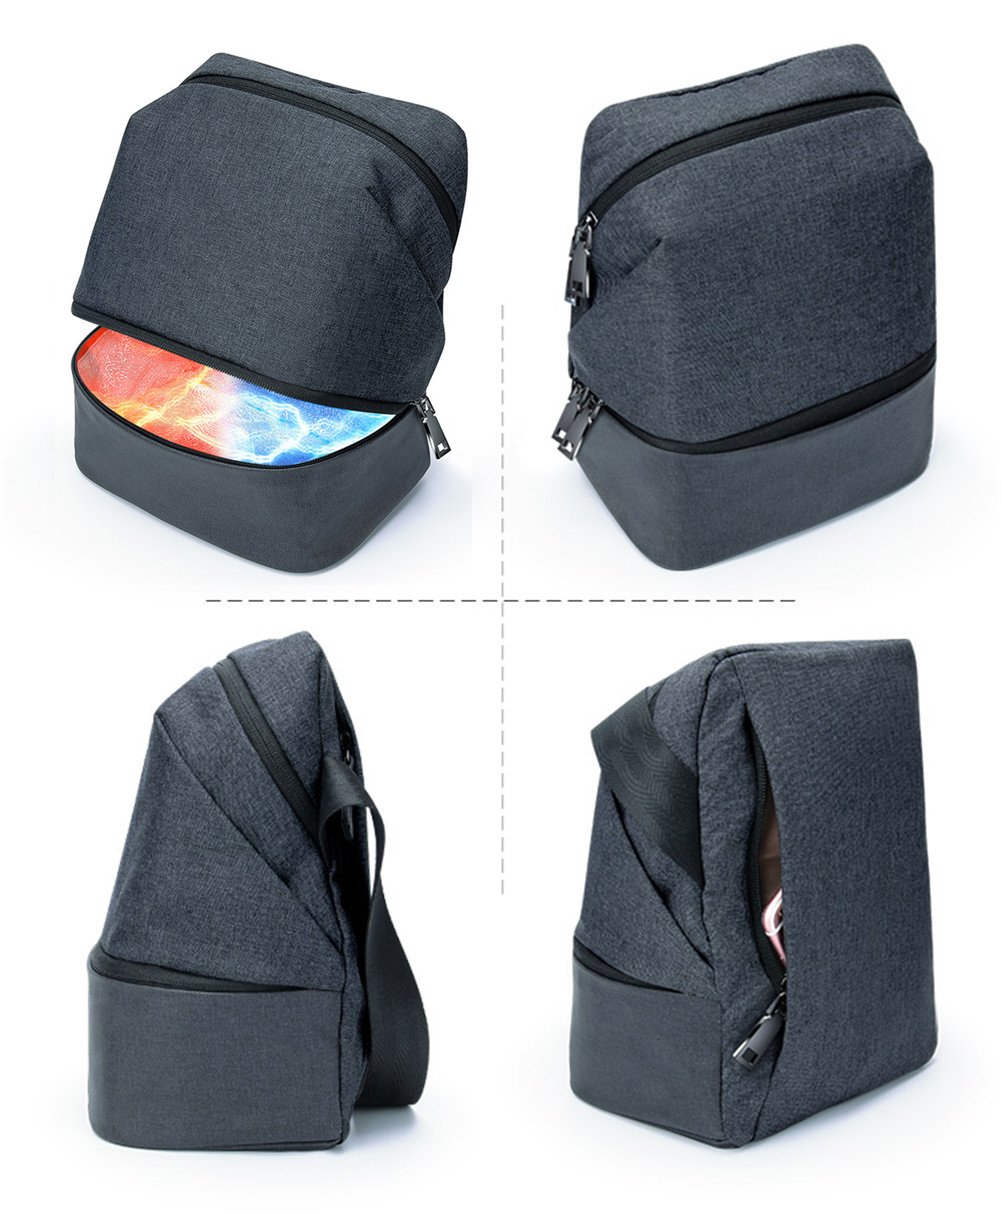 Lunch Bag 2-Layer With Insulated Picnic Cooler For Picnic Travel Work With Zipper